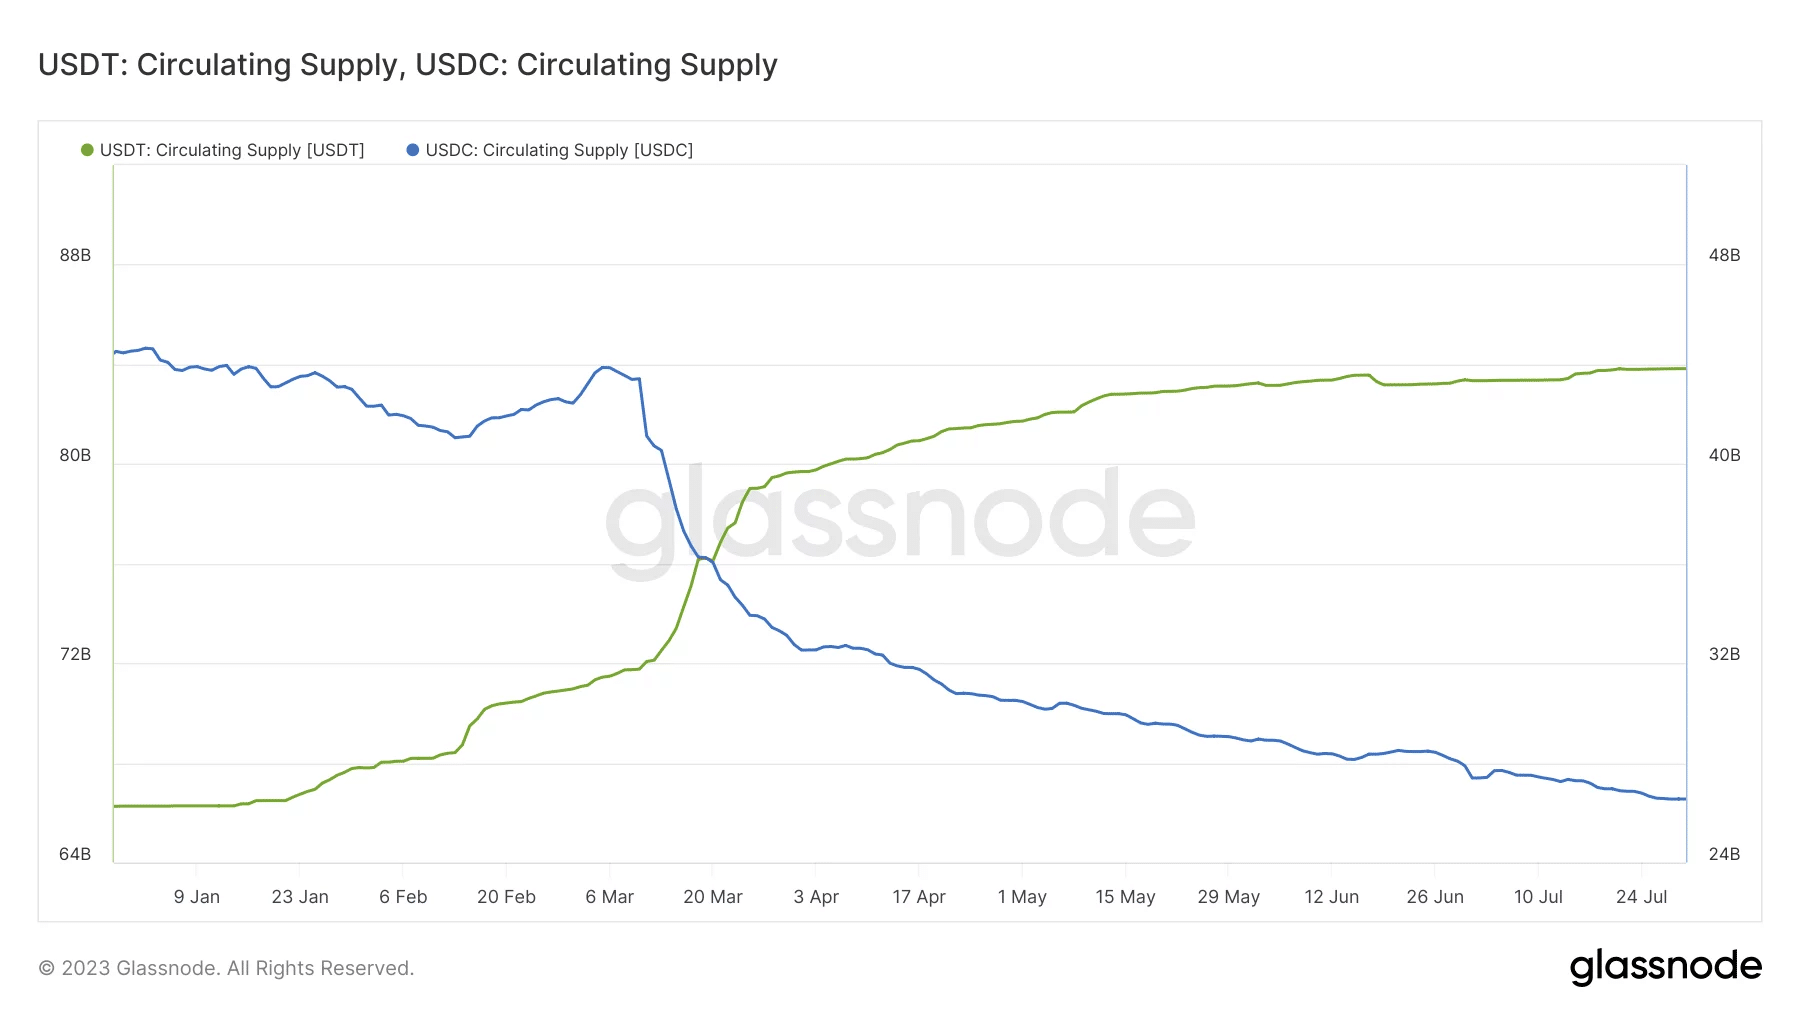 USDT (green) and USDC (blue) currently in circulation